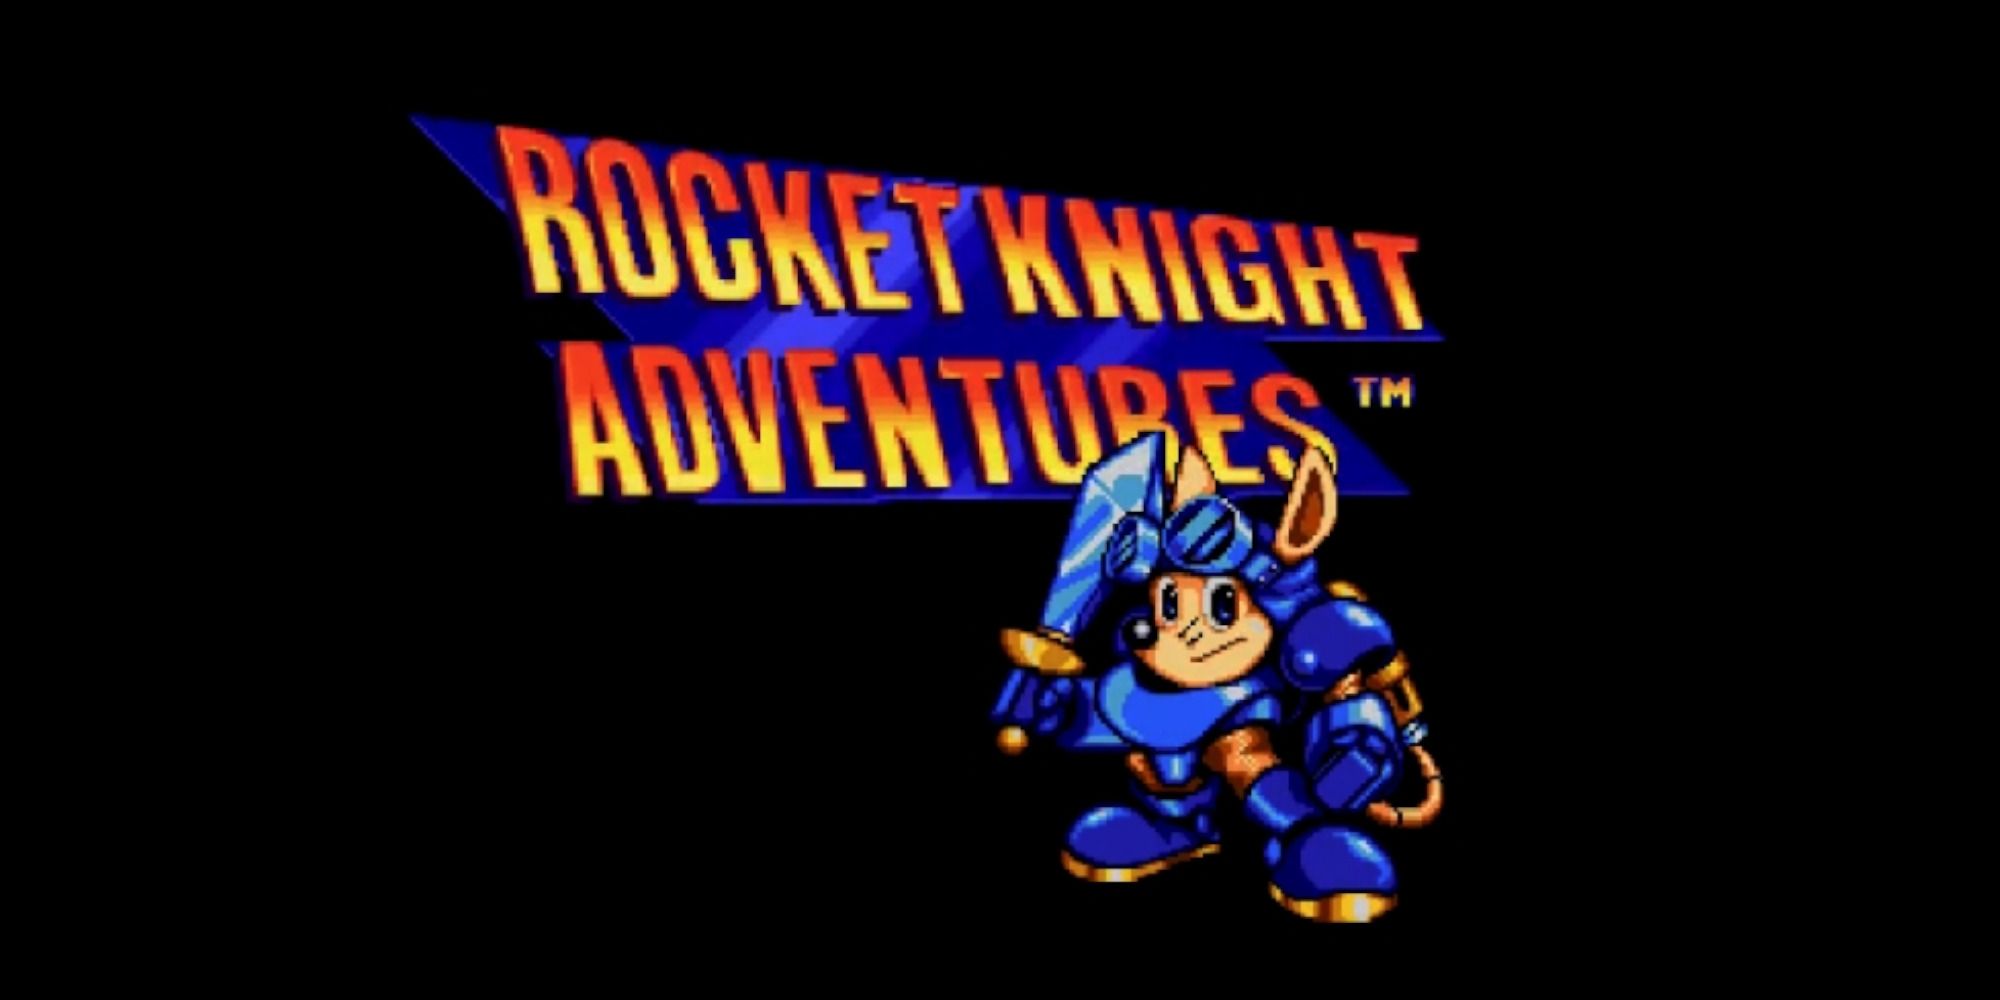 Rocket Knight Adventures title art featuring Sparkster the mouse